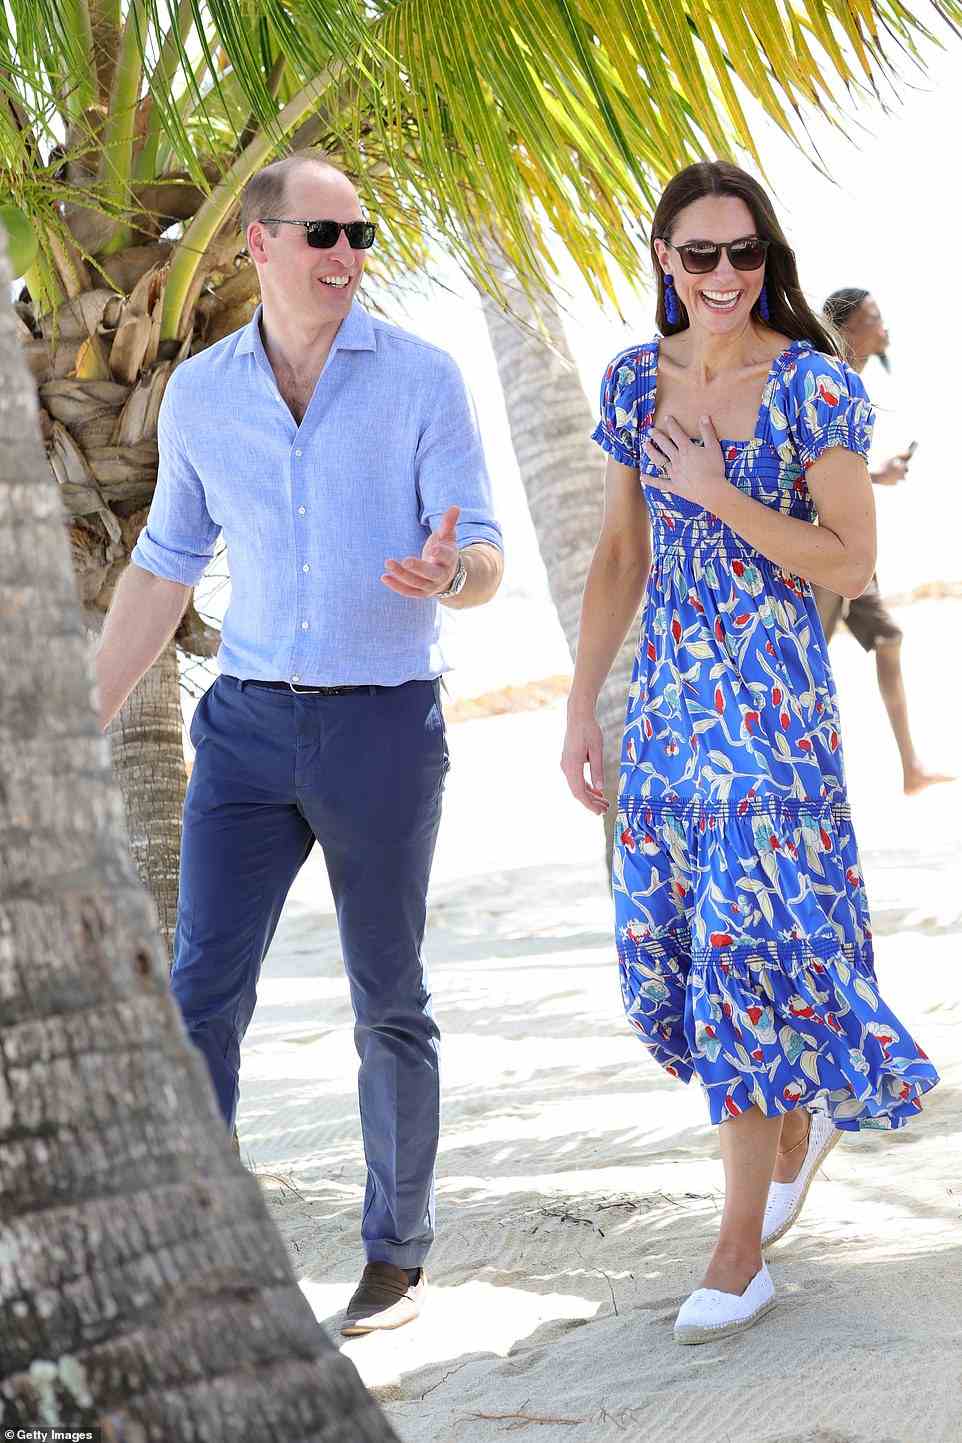 Pictured: mThe Duke and Duchess of Cambridge on the Beach after a Garifuna Festival on the second day of a Platinum Jubilee Royal Tour of the Caribbe